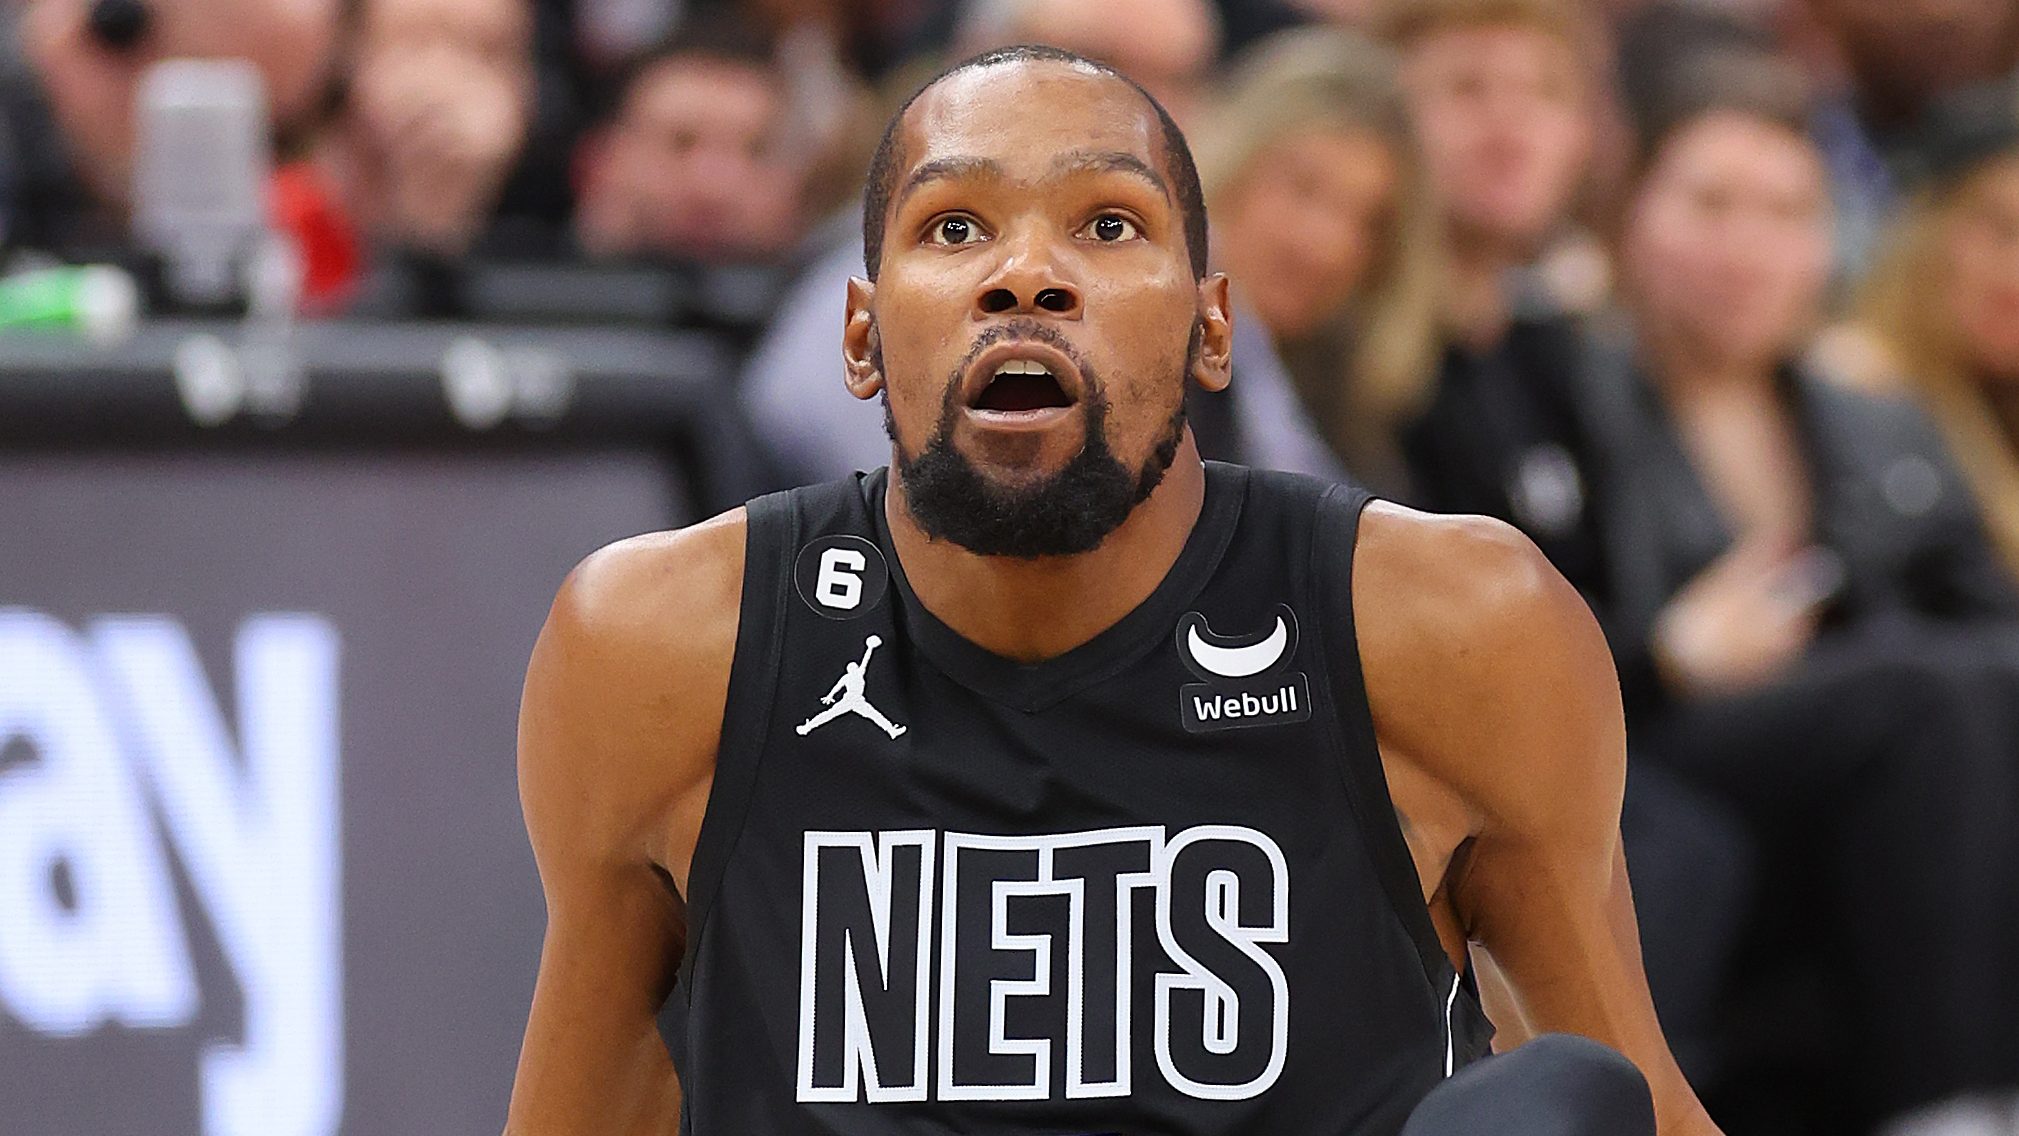 PHOTO: Are these the Nets 2019/20 official jerseys? - NetsDaily